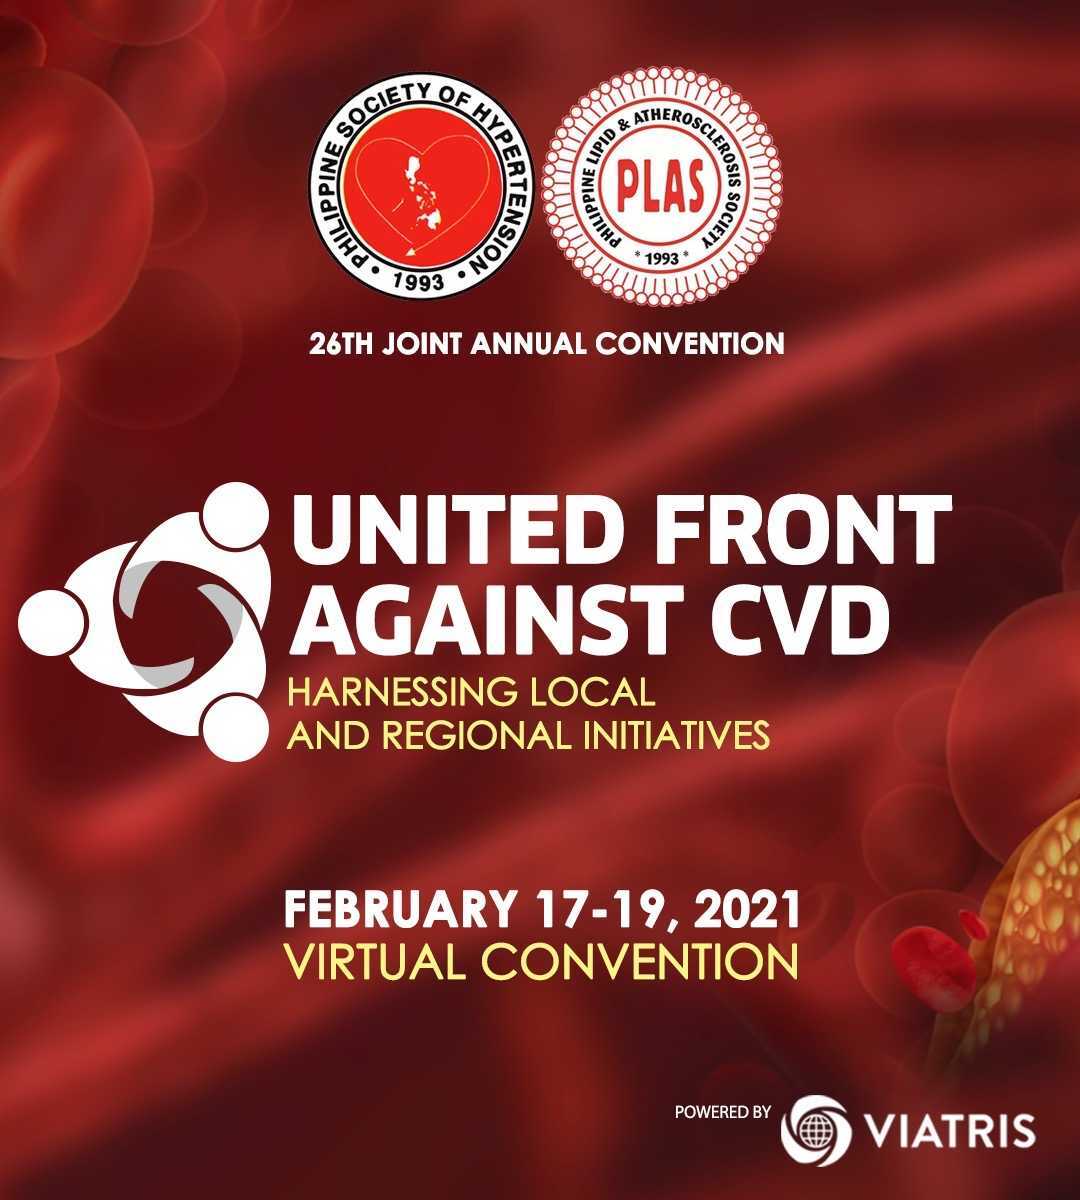 26th Joint PLAS-PSH Annual Convention: United Front Against CVD -  Harnessing Local and Regional Initiatives - Philippine Society of Nephrology